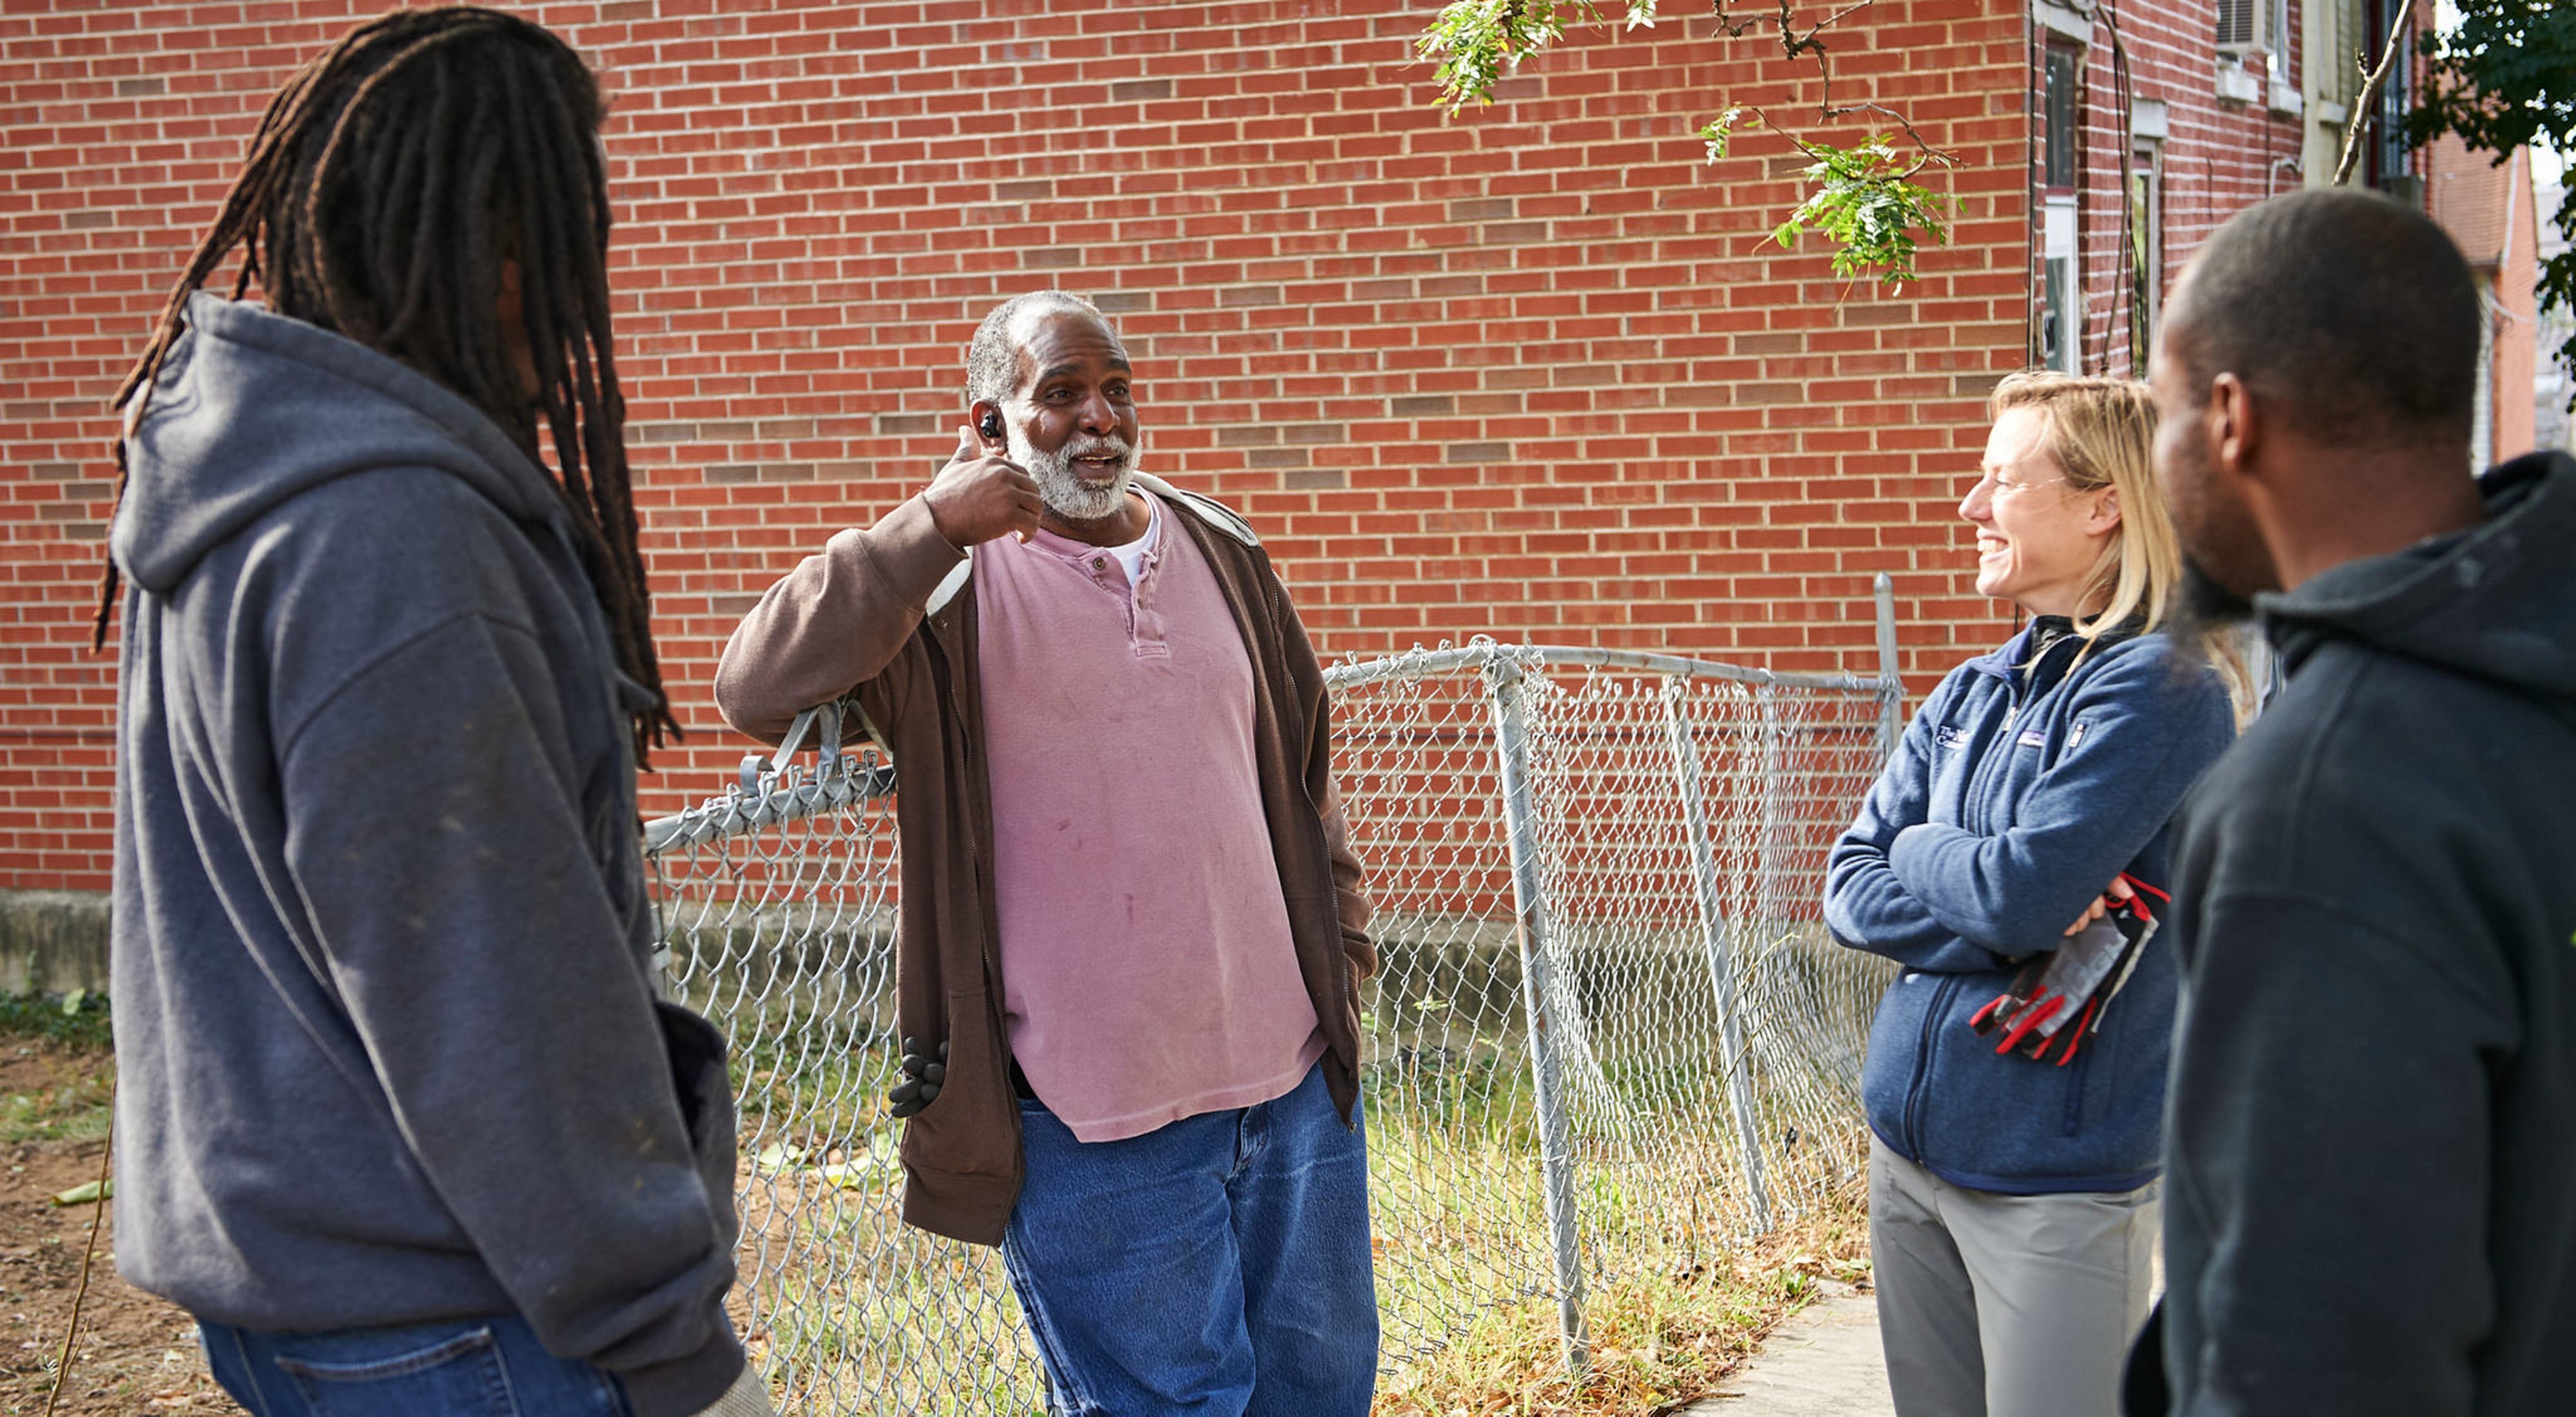 Four people stand together talking next to an open lot. The man in the center is the focus of attention. He is smiling and gesturing as he talks.